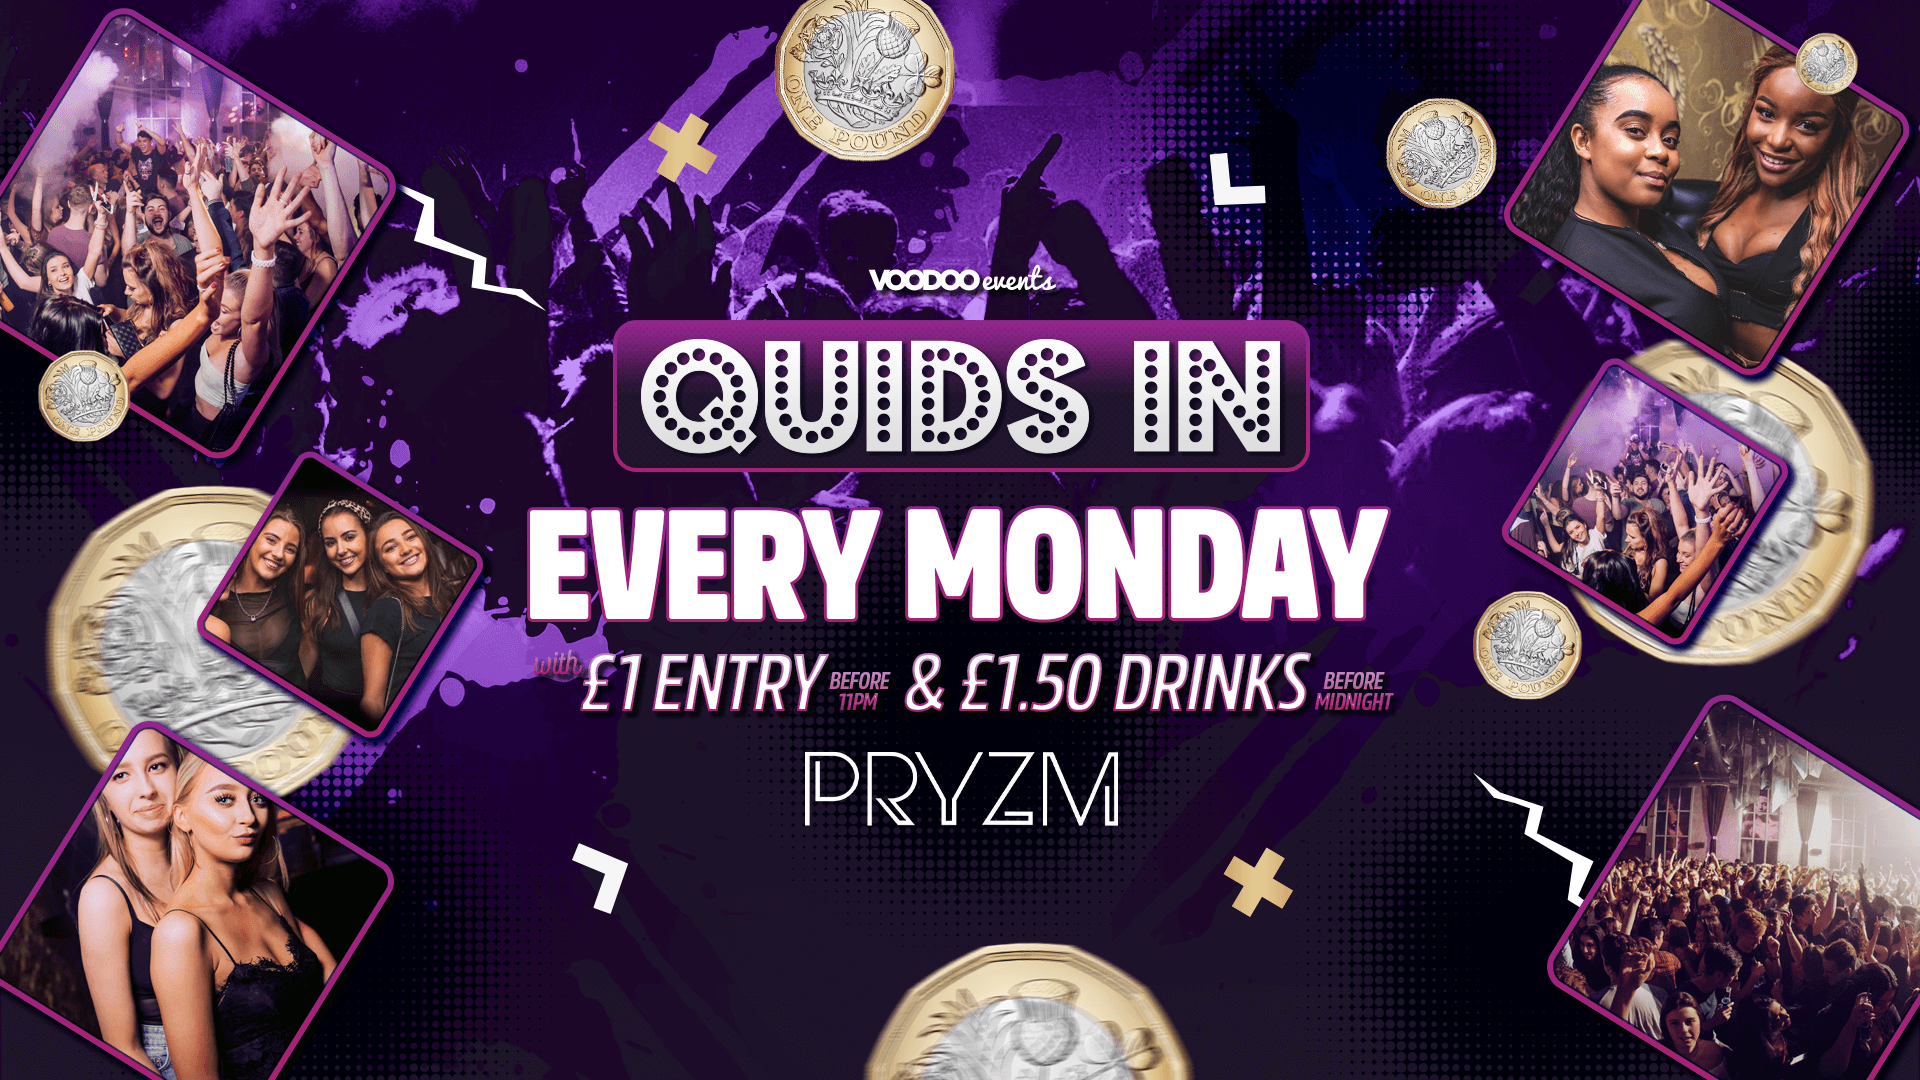 Quids In Mondays at PRYZM – 16th August